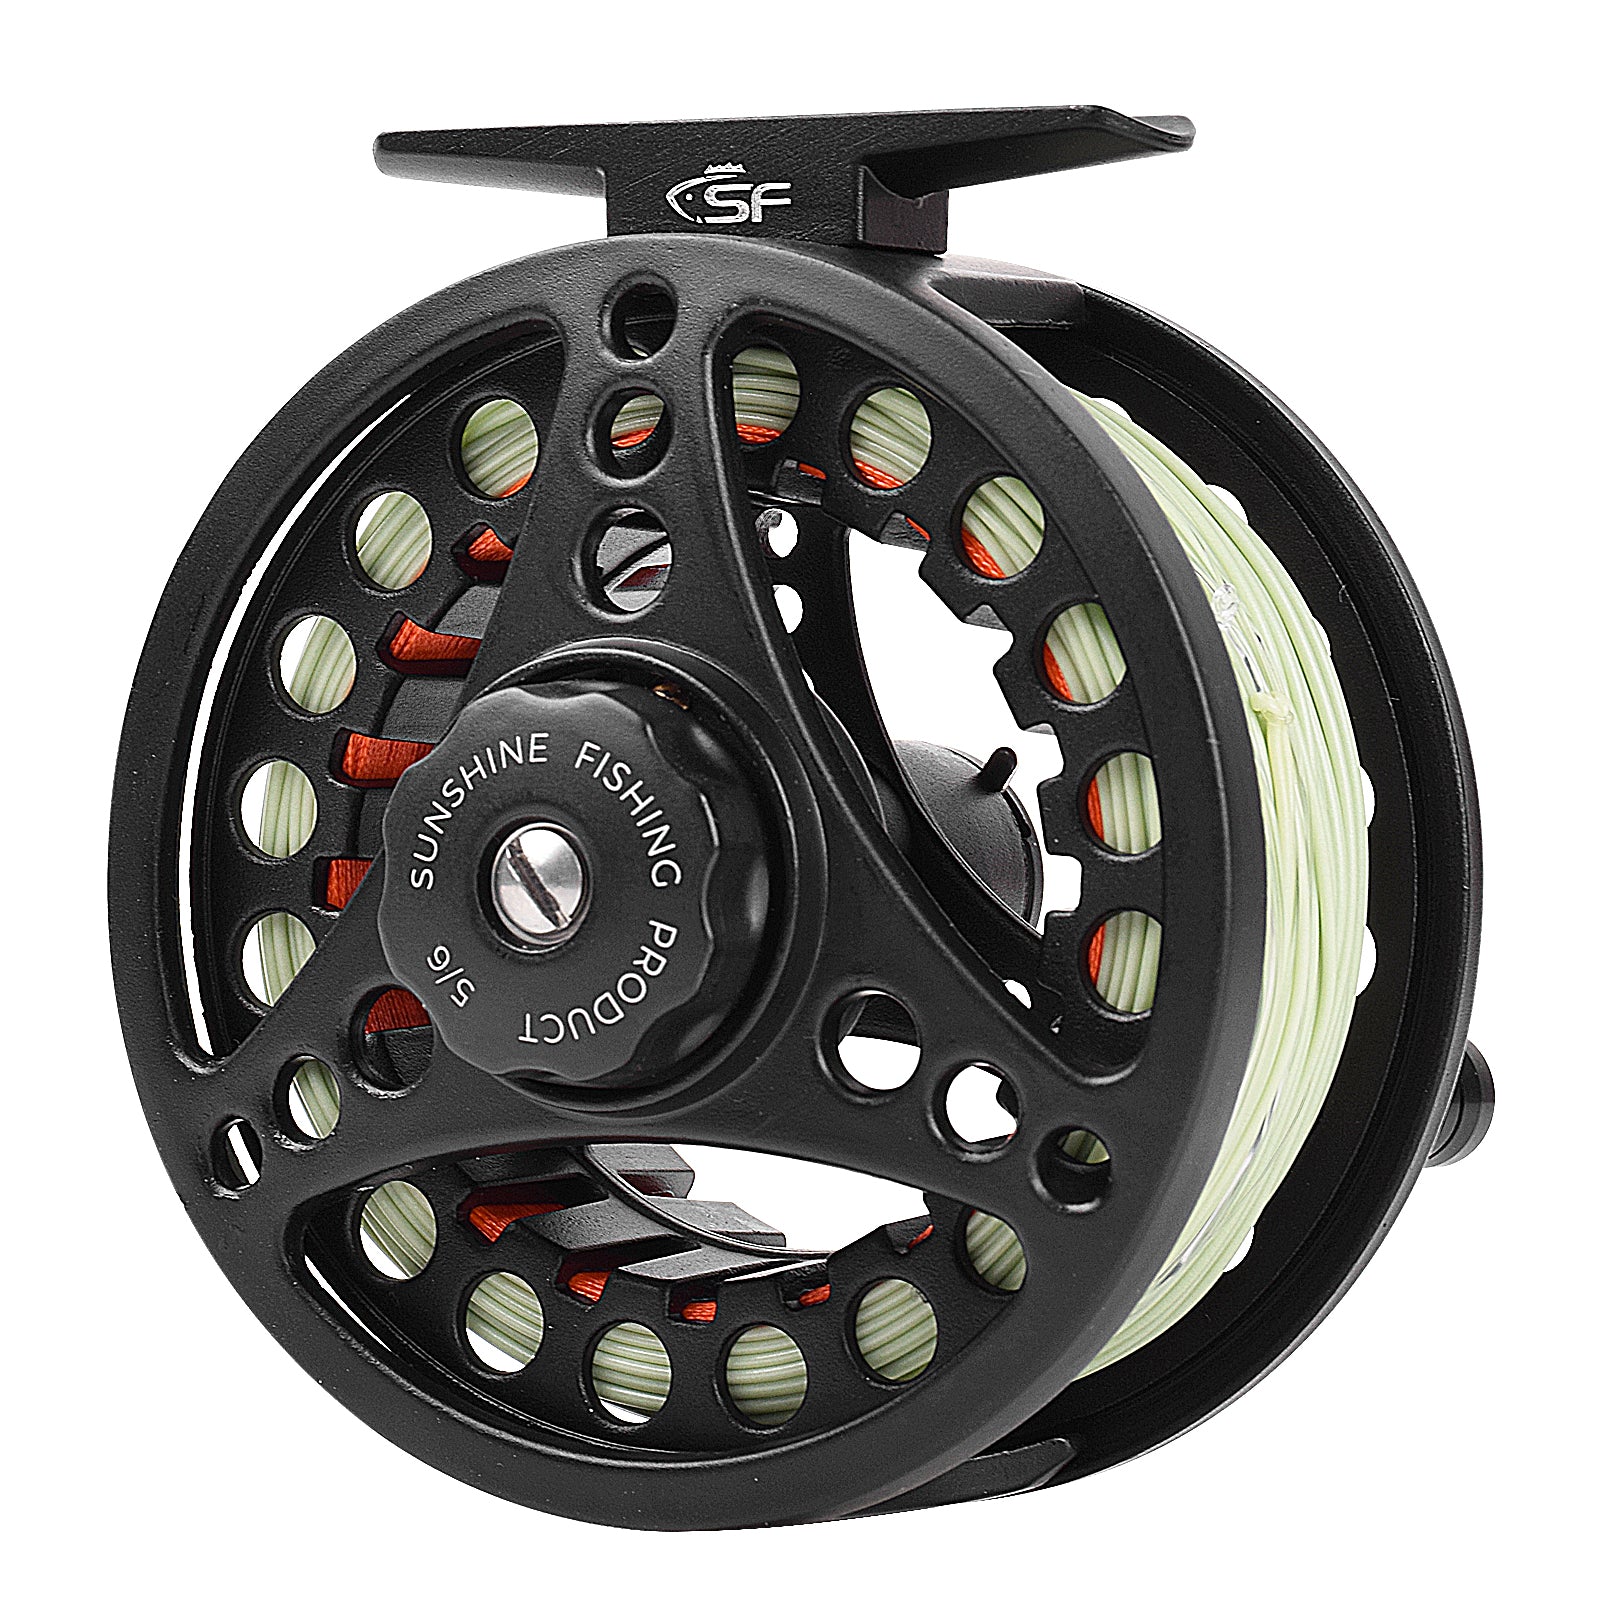 1/2WT 3/4WT 5/6WT 7/8WT) Fly Reel with Line Combo Aluminum Alloy Large  Arbor Fly Fishing Reels Weight Forward Fly Line with Braided Backing Taper  Leader Pre-Tied - Buy Online - 77401480